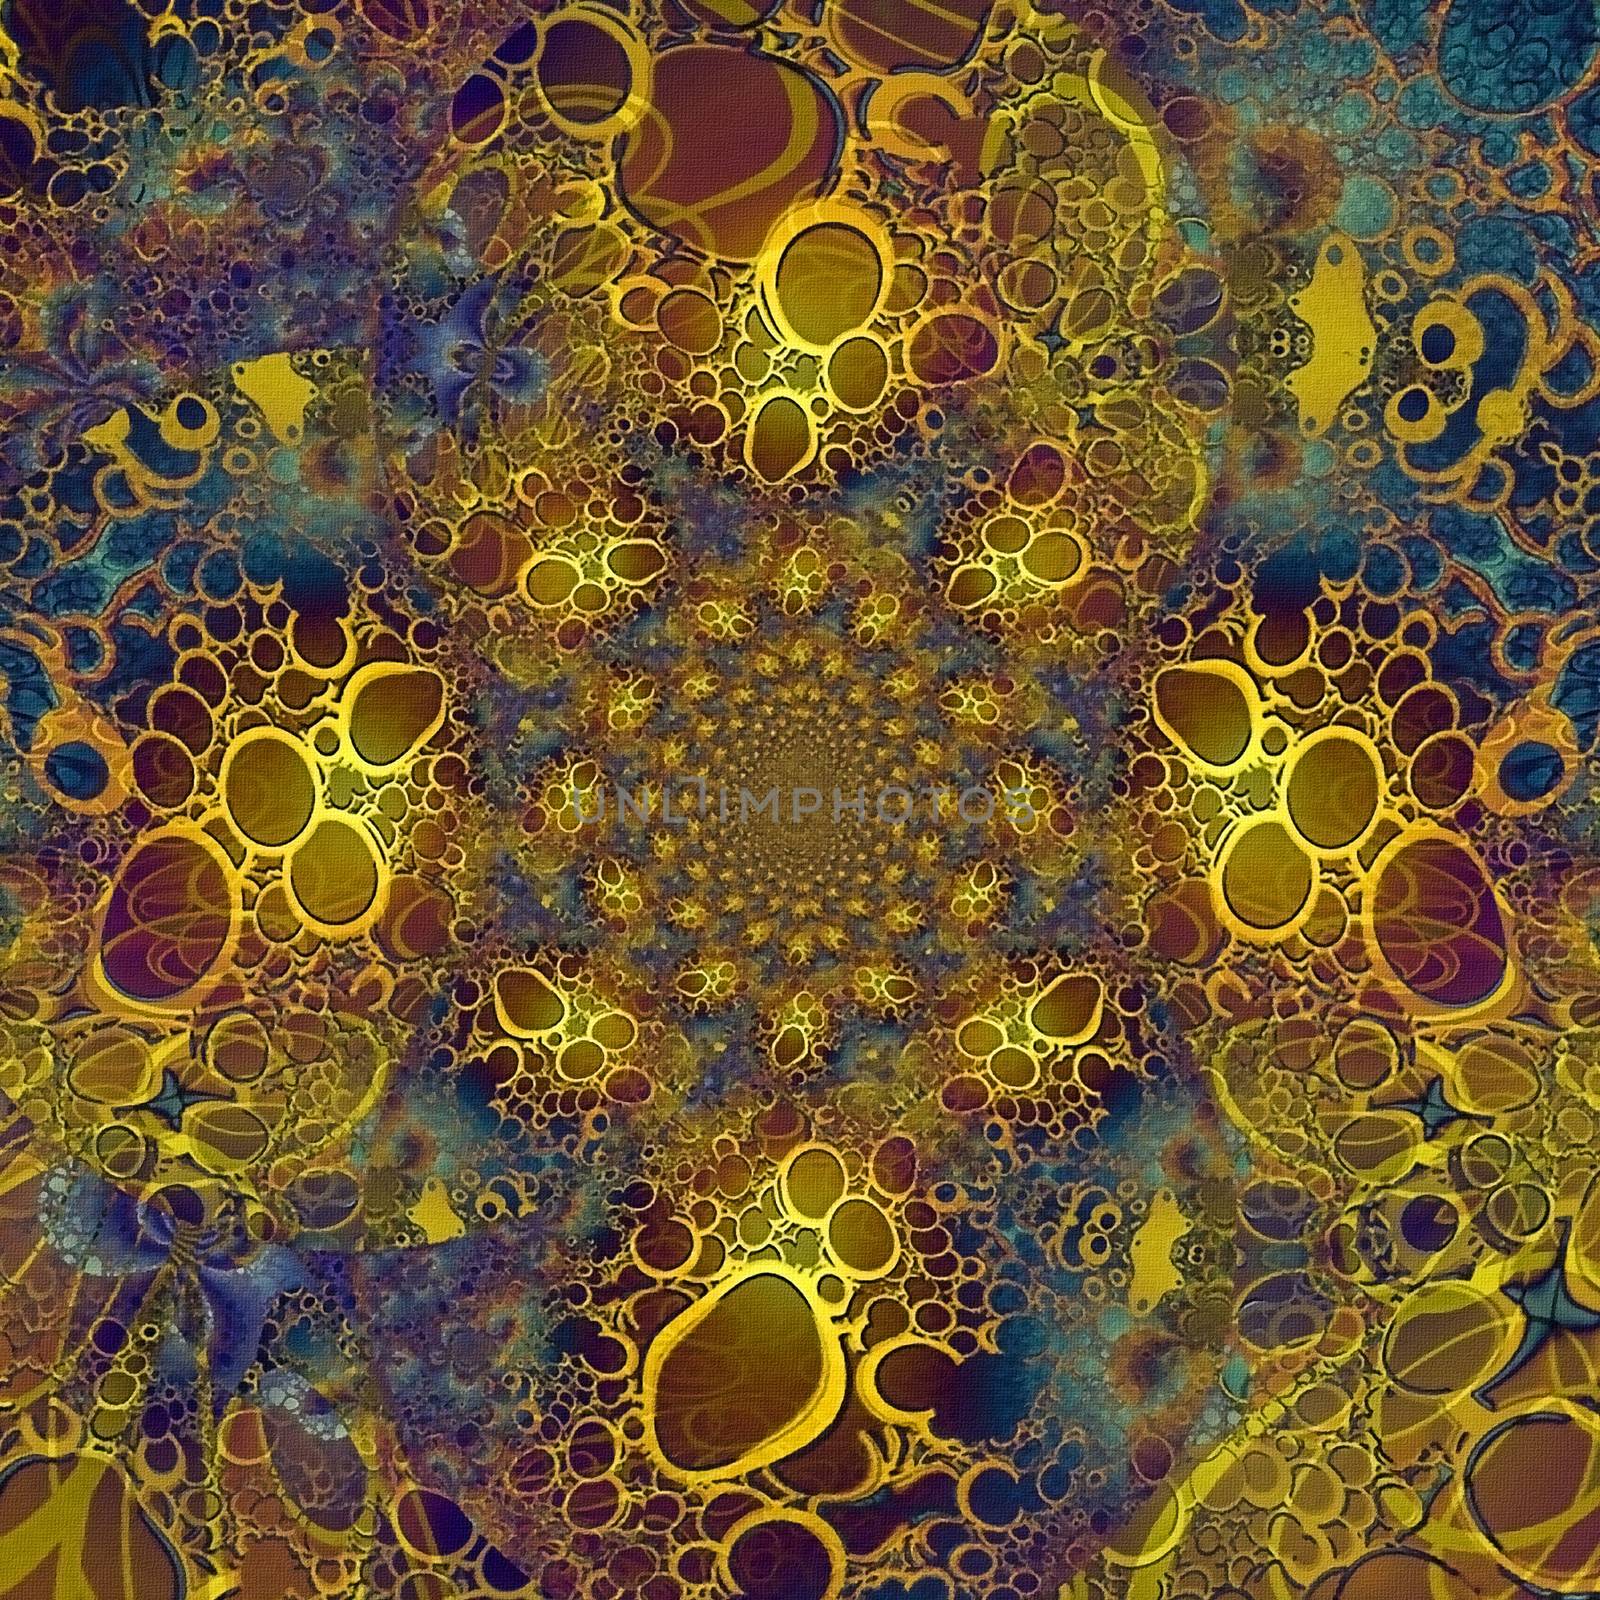 Abstract fractal by applesstock